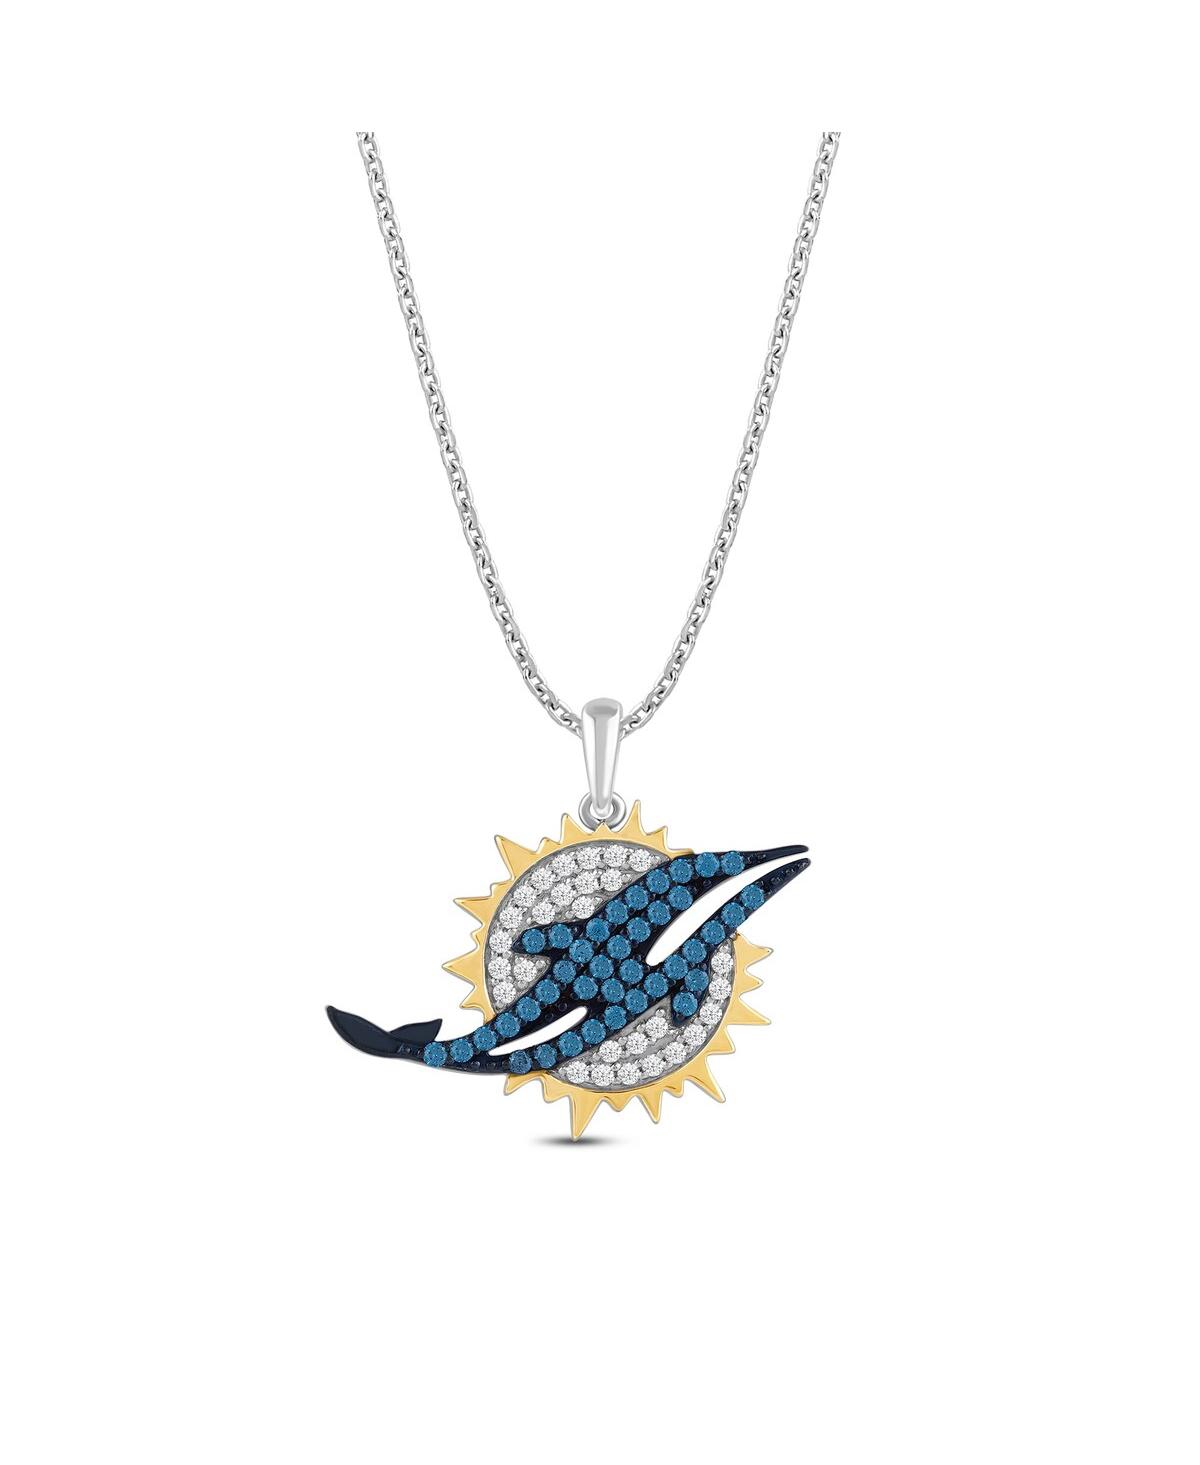 Men's and Women's Miami Dolphins Team Necklace - Silver